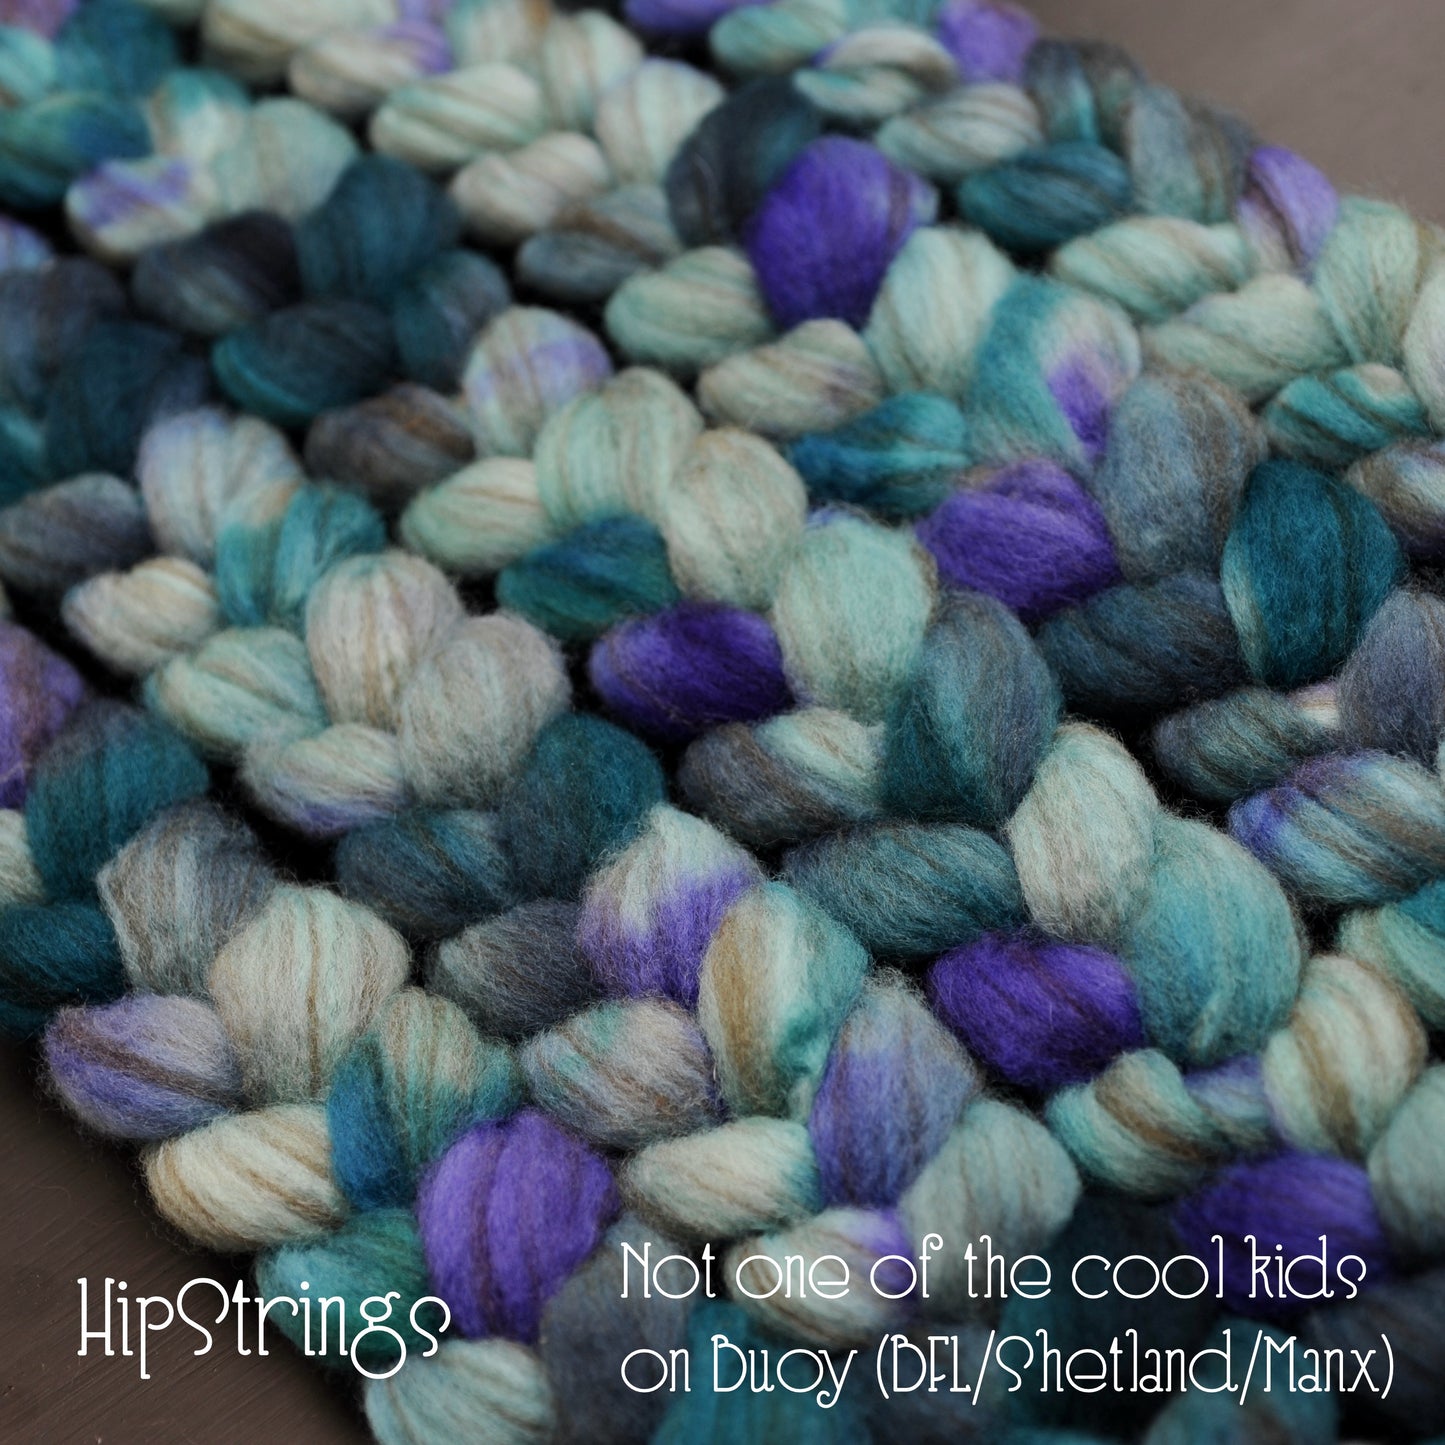 Not one of the cool kids - Hand Dyed Buoy (BFL/Shetland/Manx) Signature Blend - 4 oz